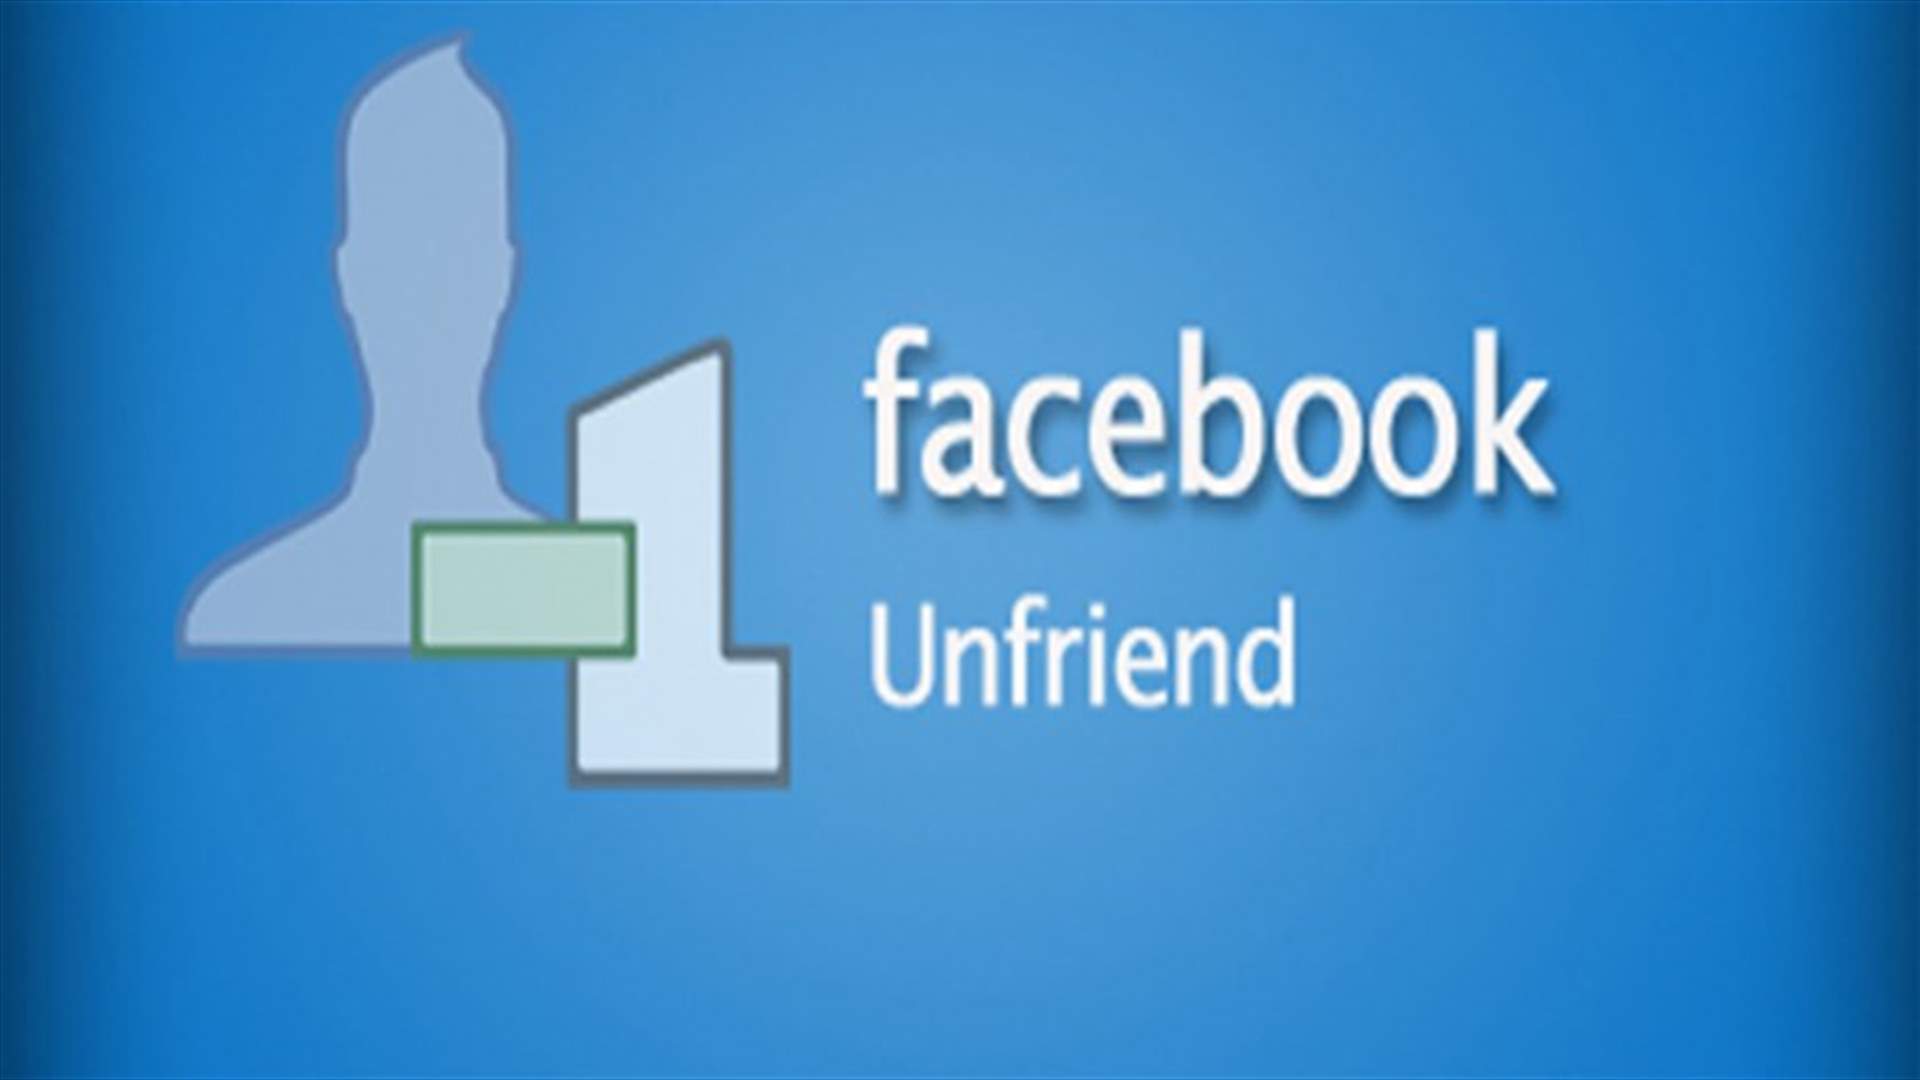 Unfriend', 'lol', 'dude' and 'babe': Words used way before Facebook  happened - The Economic Times